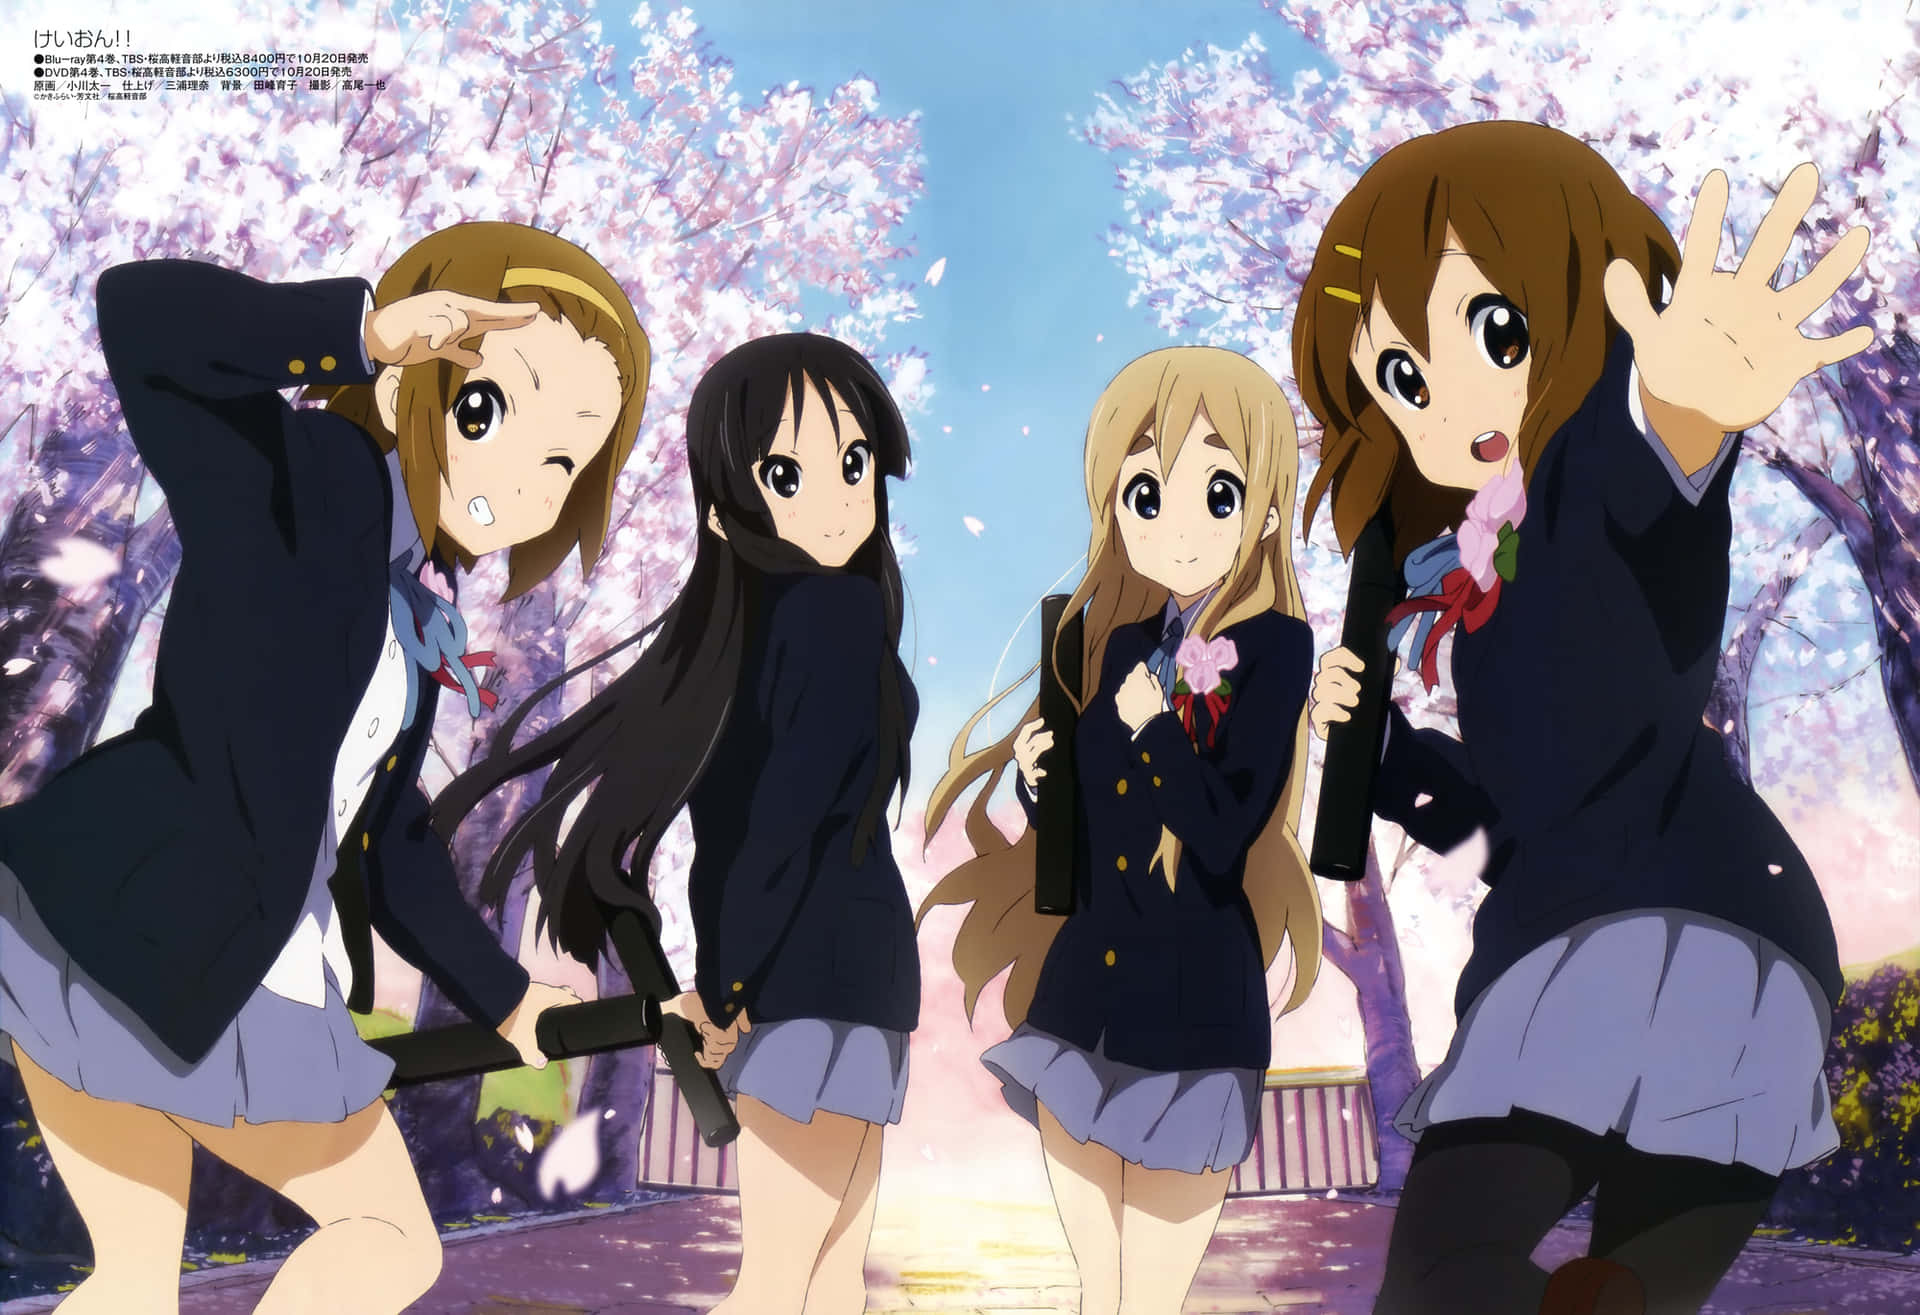 A Group Of Girls In School Uniforms Standing In Front Of A Tree